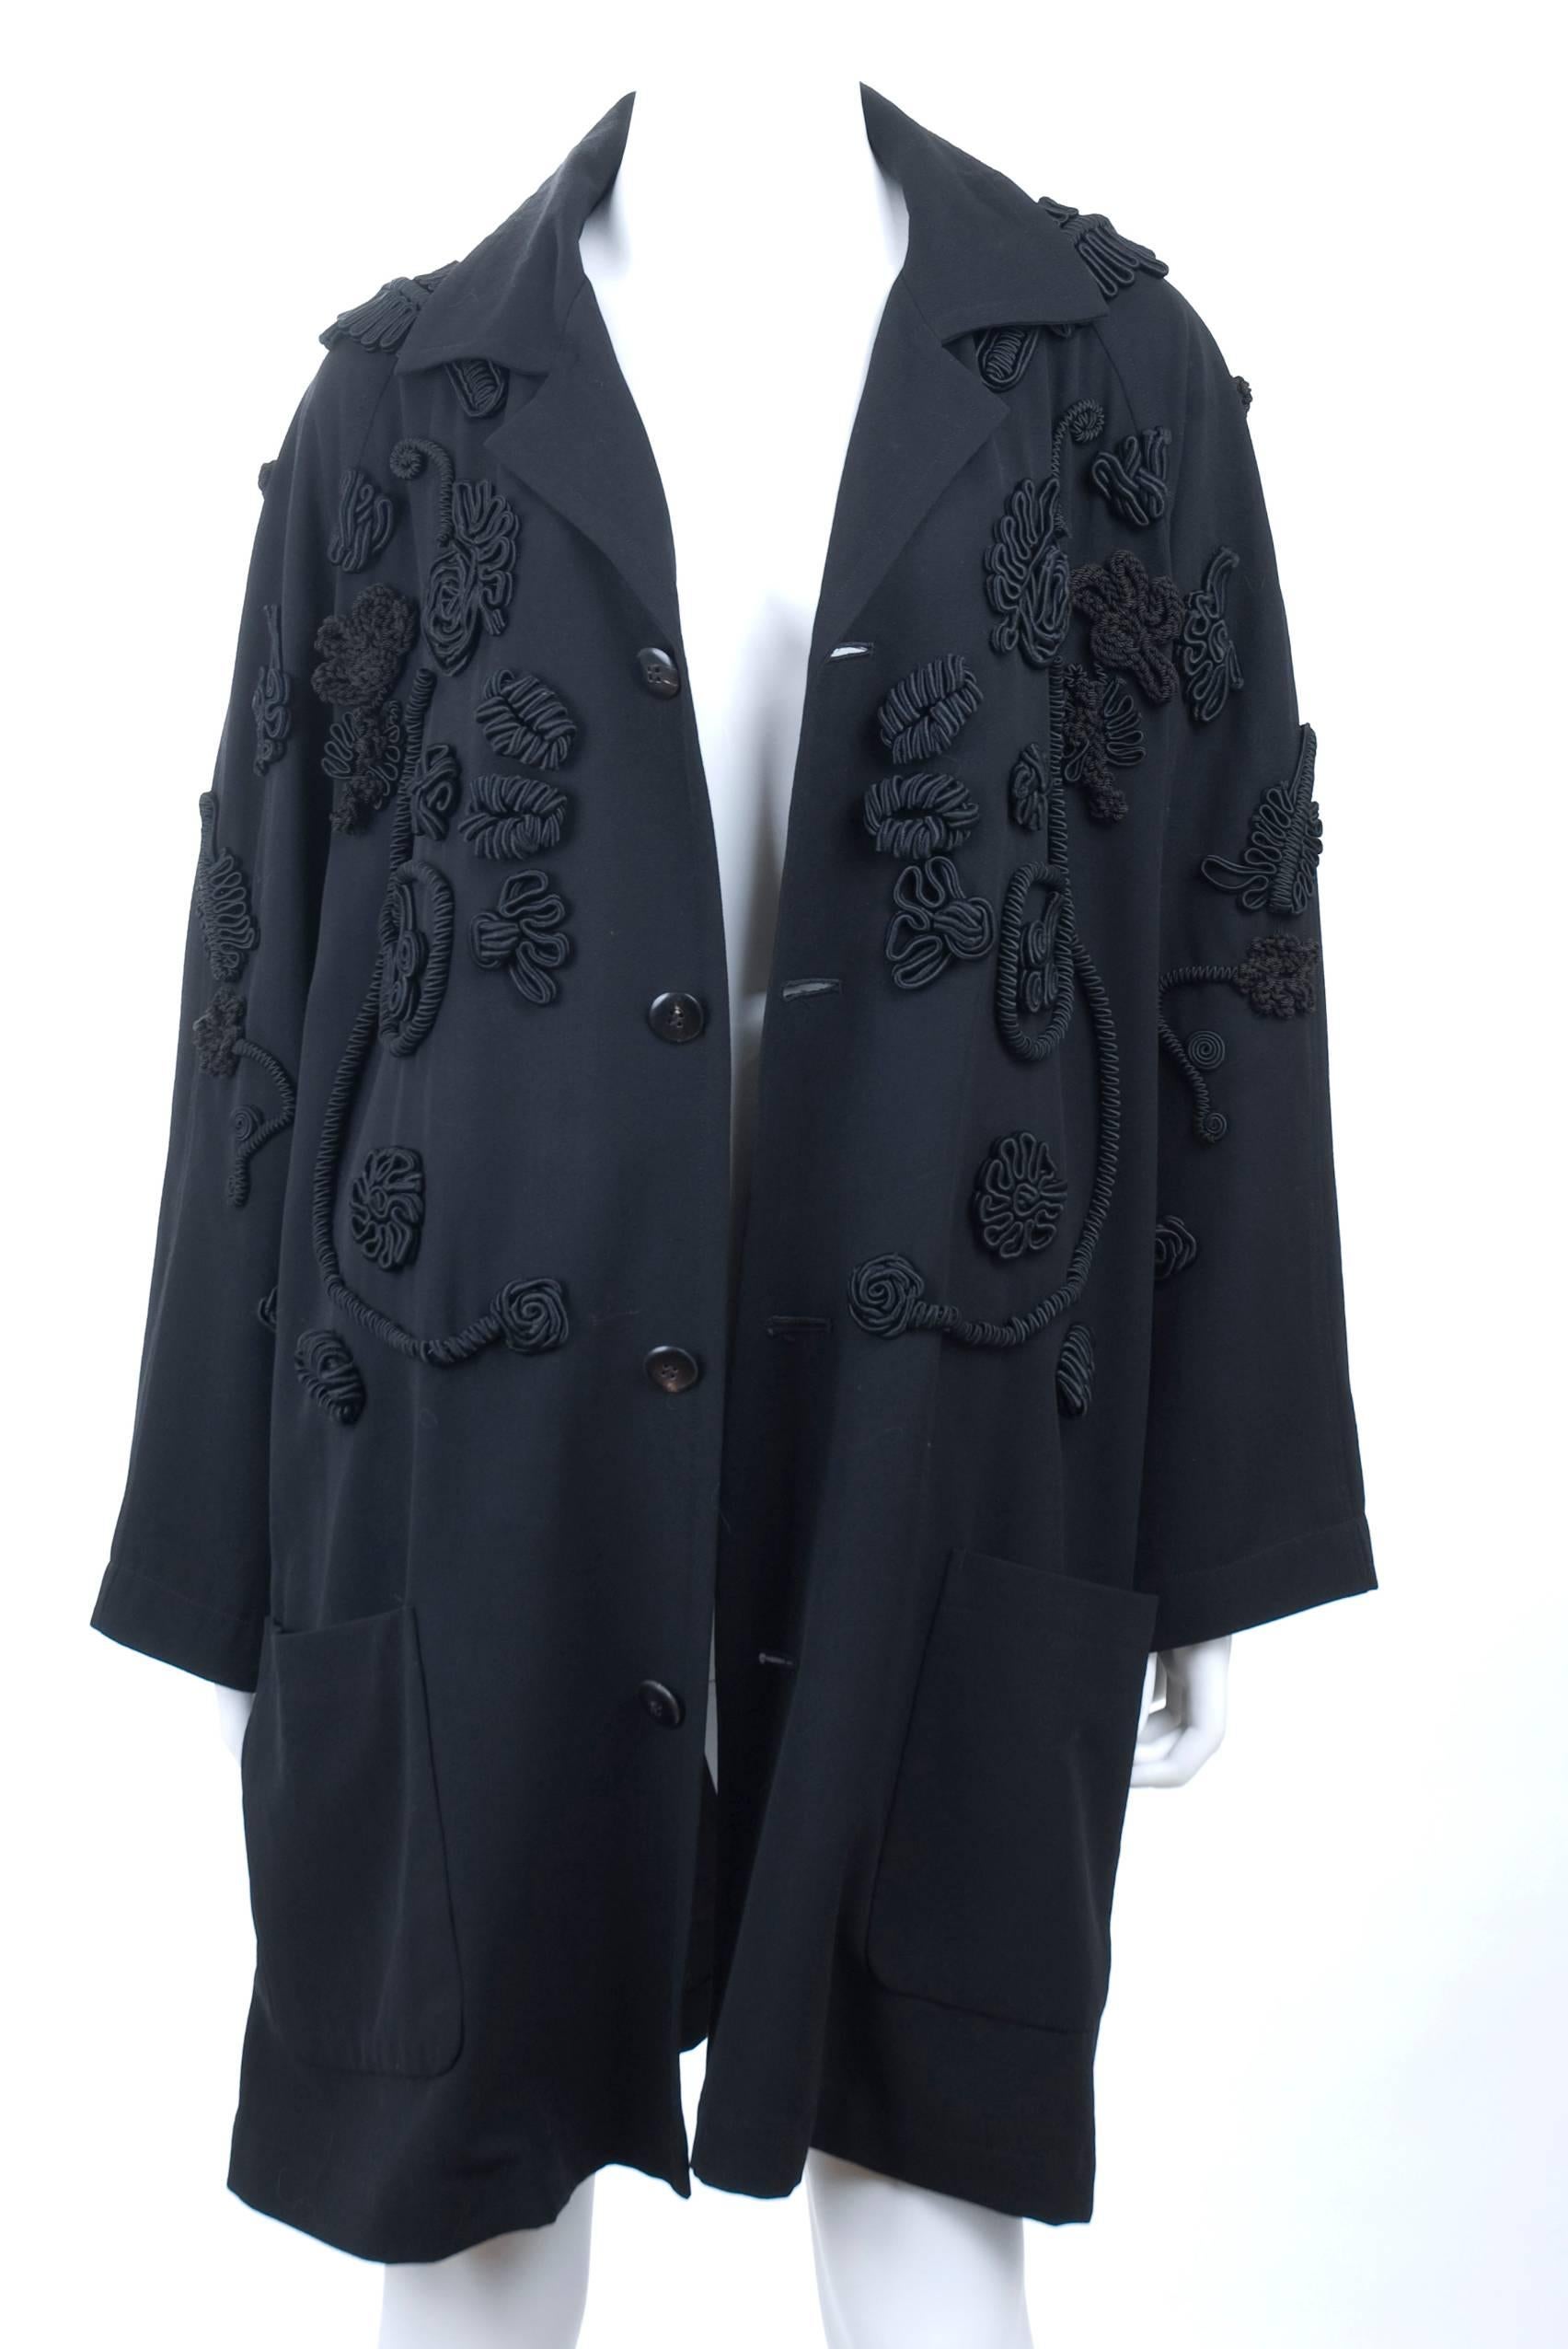 Amazing vintage 90's Yohji Yamamoto black coat with corded embroidery and tassels allover. The fabric is 100% very fine wool and lined with cupro.
It's in excellent condition and truly no flaws to mention.
Size: M
Measurements:
Length 34 - bust 48 -